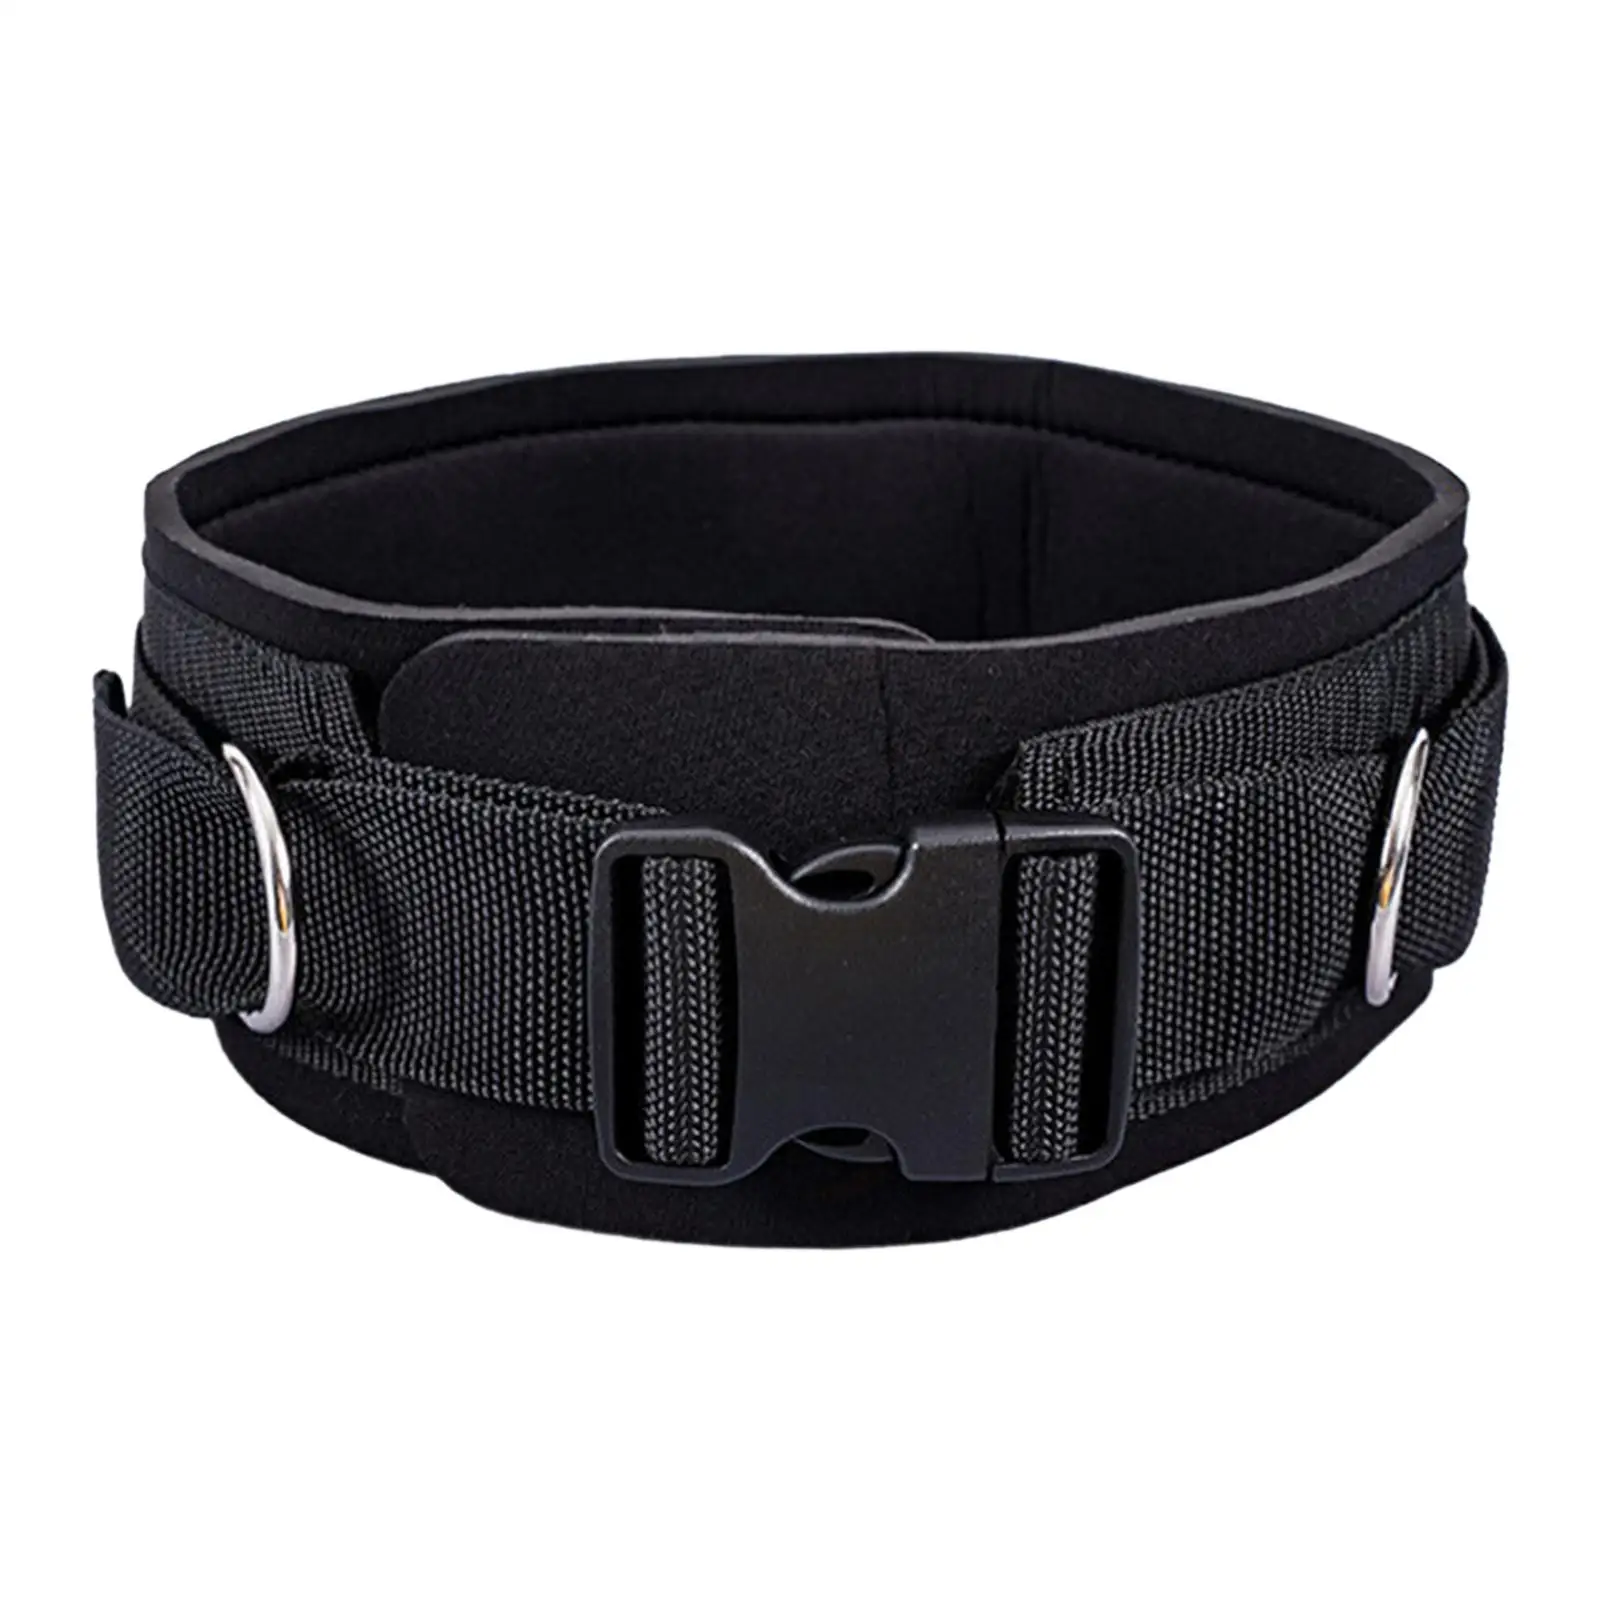 Strength Weightlifting Belt for Men and Women, Weight Lifting Support for Lifting, Fitness, Cross Training and Powerlifitng